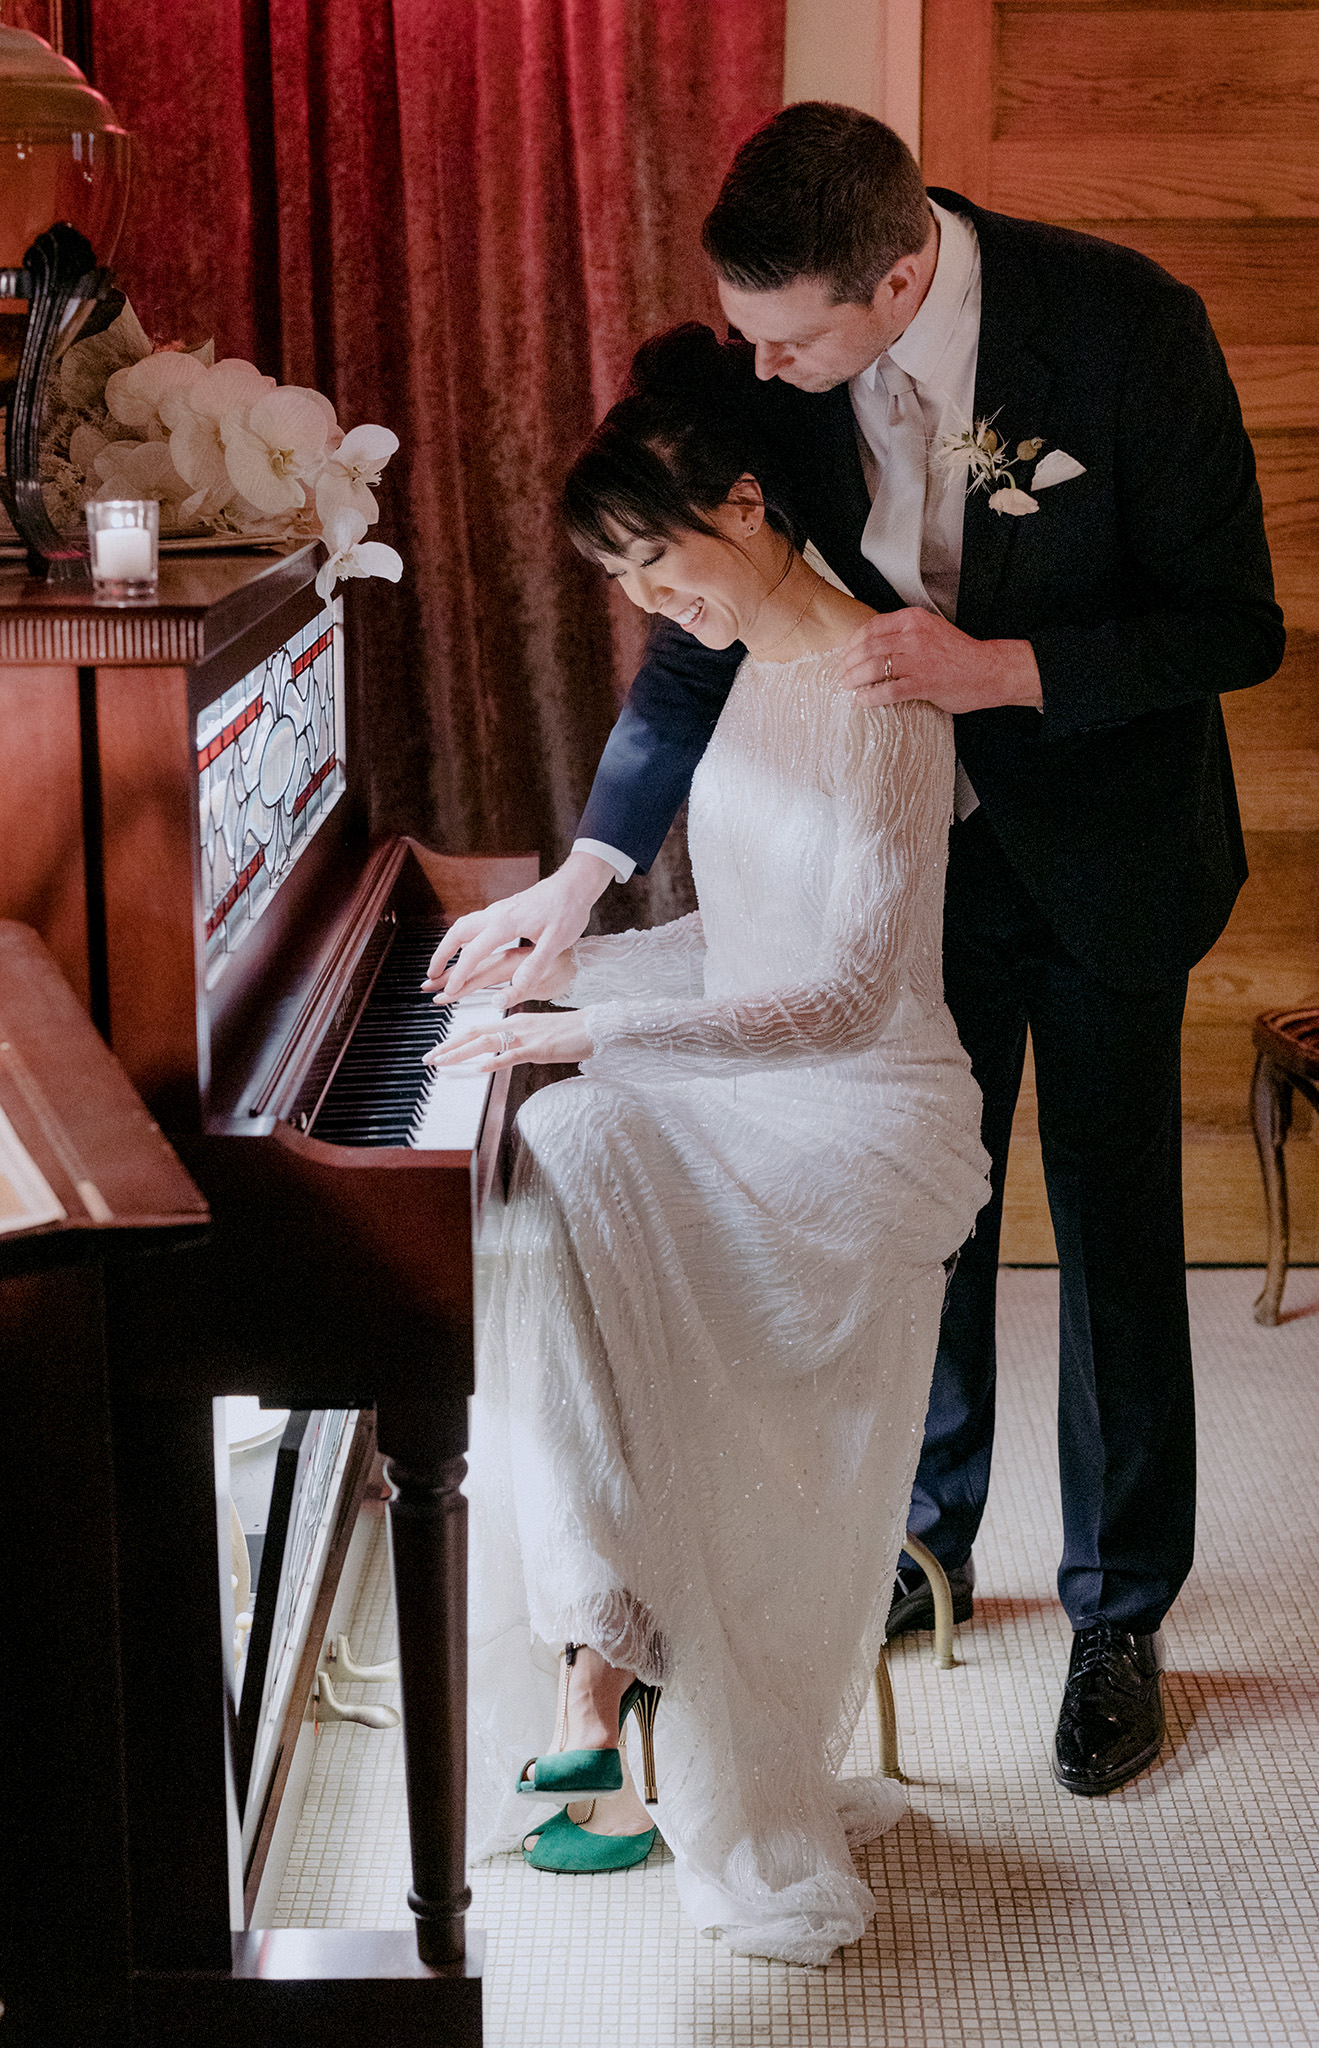 Men reaches over womans shoulder as she plays piano in wedding dress